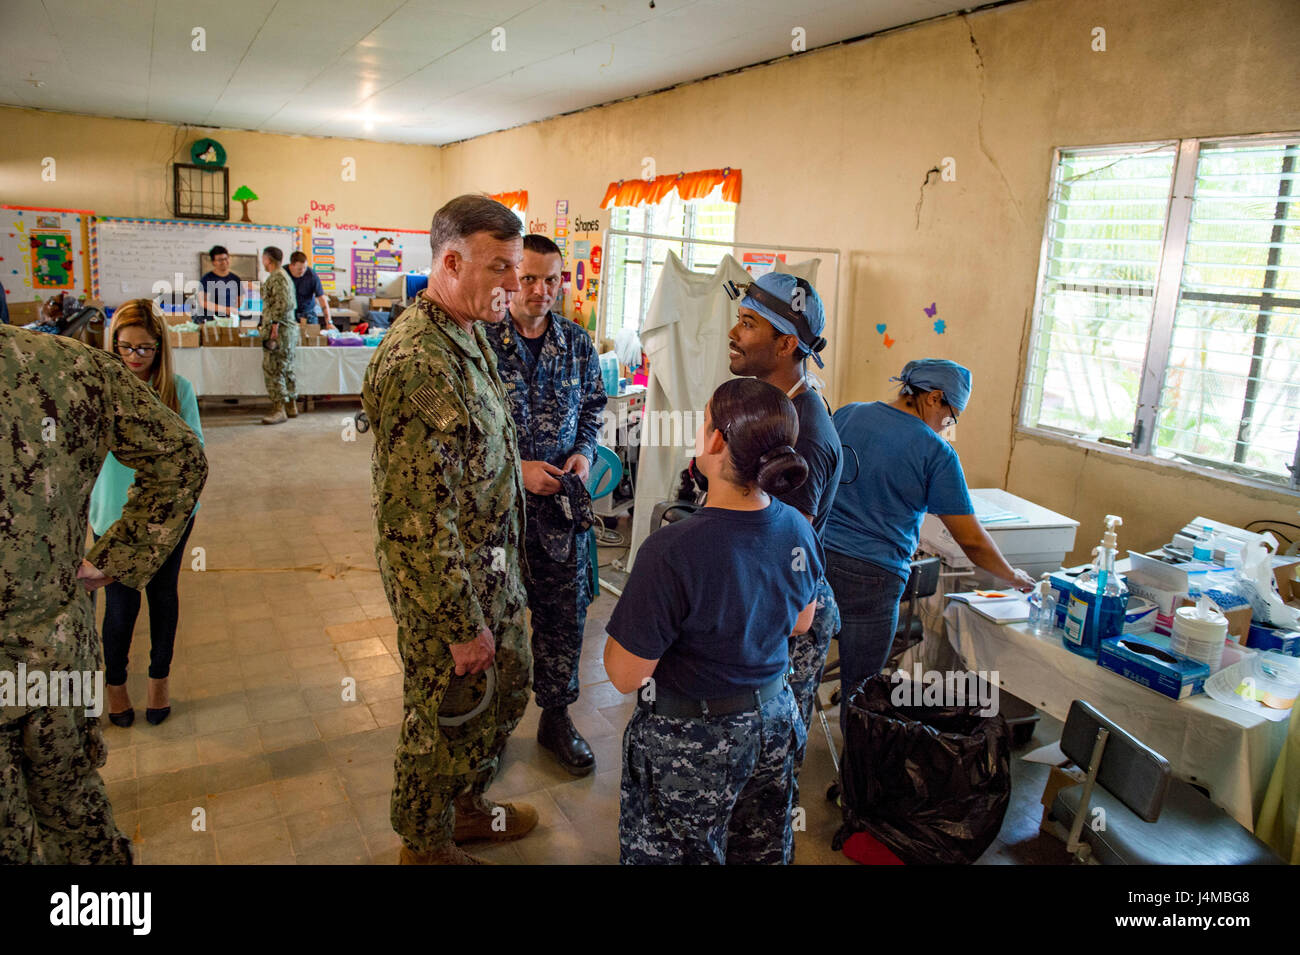 170223-N-YL073-442 TRUJILLO, Honduras (Feb. 23, 2017) – Rear Adm. Sean S. Buck (left), Commander U.S. Naval Forces Southern Command/U.S. 4th Fleet (USNAVSO/FOURTHFLT), speaks with Sailors during a tour of the Continuing Promise 2017 (CP-17) medical site in support of the mission's visit to Trujillo, Honduras. CP-17 is a U.S. Southern Command-sponsored and U.S. Naval Forces Southern Command/U.S. 4th Fleet-conducted deployment to conduct civil-military operations including humanitarian assistance, training engagements, and medical, dental, and veterinary support in an effort to show U.S. support Stock Photo